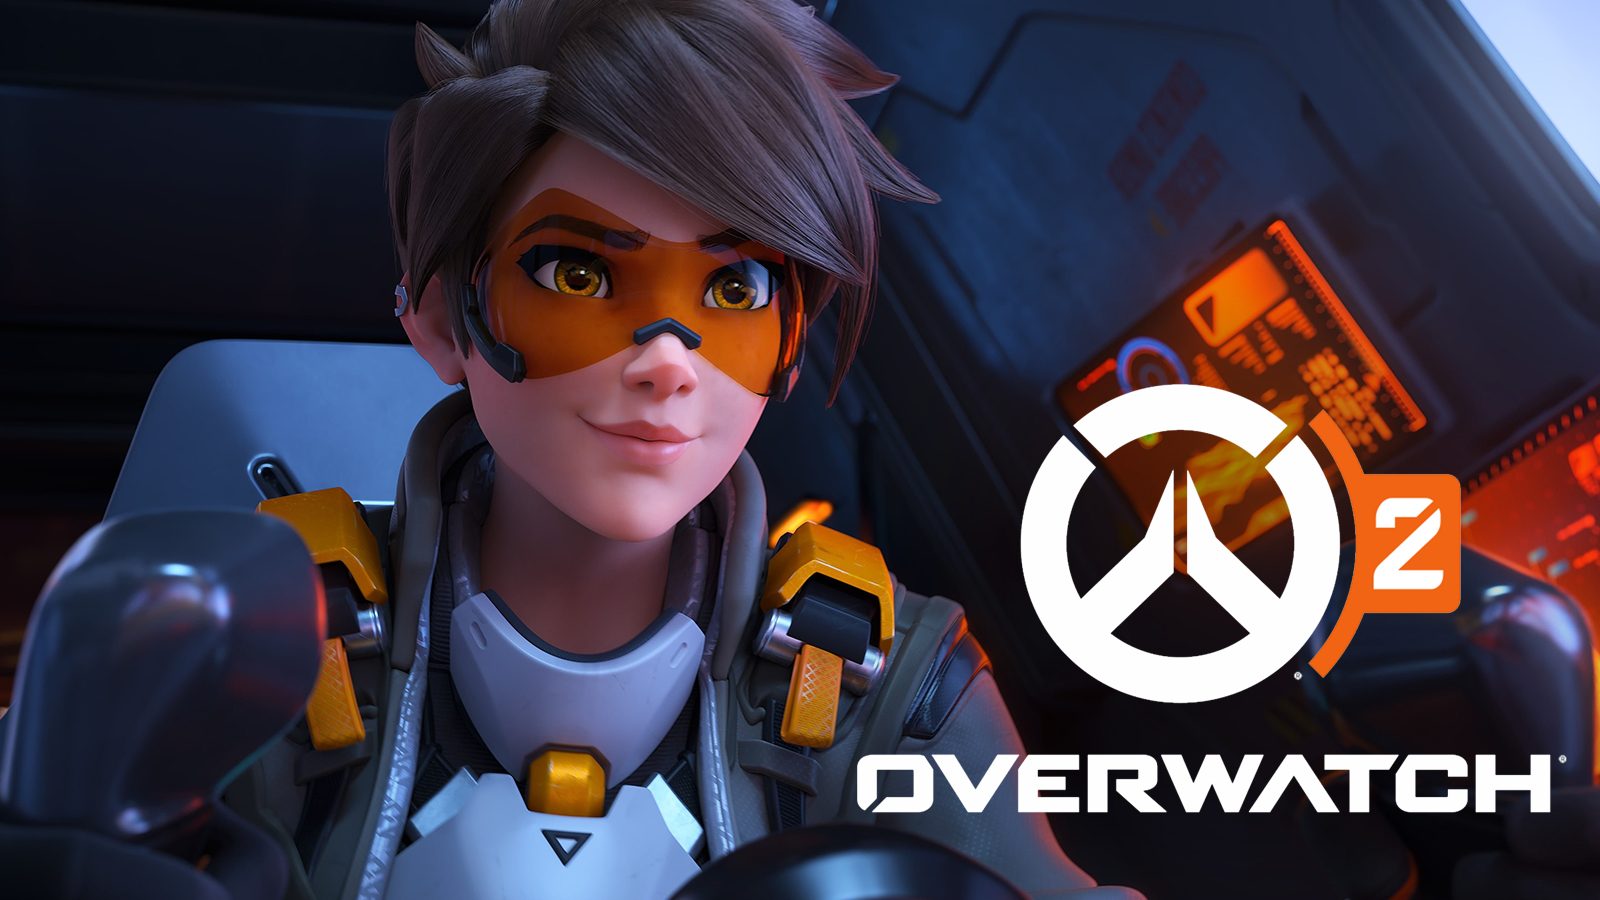 overwatch-2-everything-we-know-so-far-release-date-game-modes-3276226